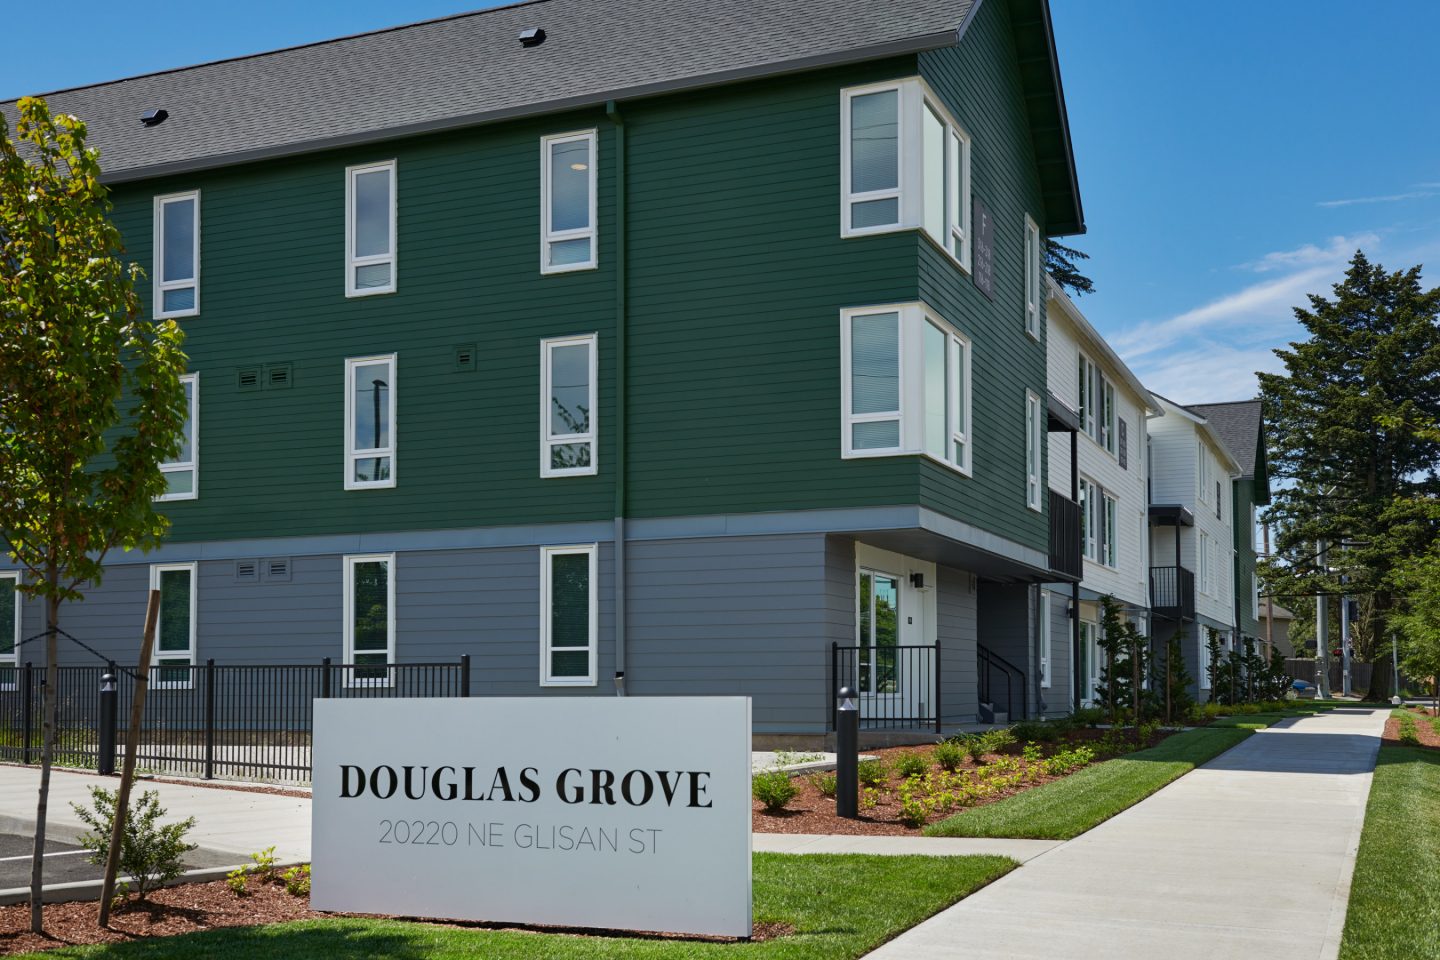 A Granite Sign Reading Douglas Grove Apartments Sits In Front Of The Green And Grey Building.